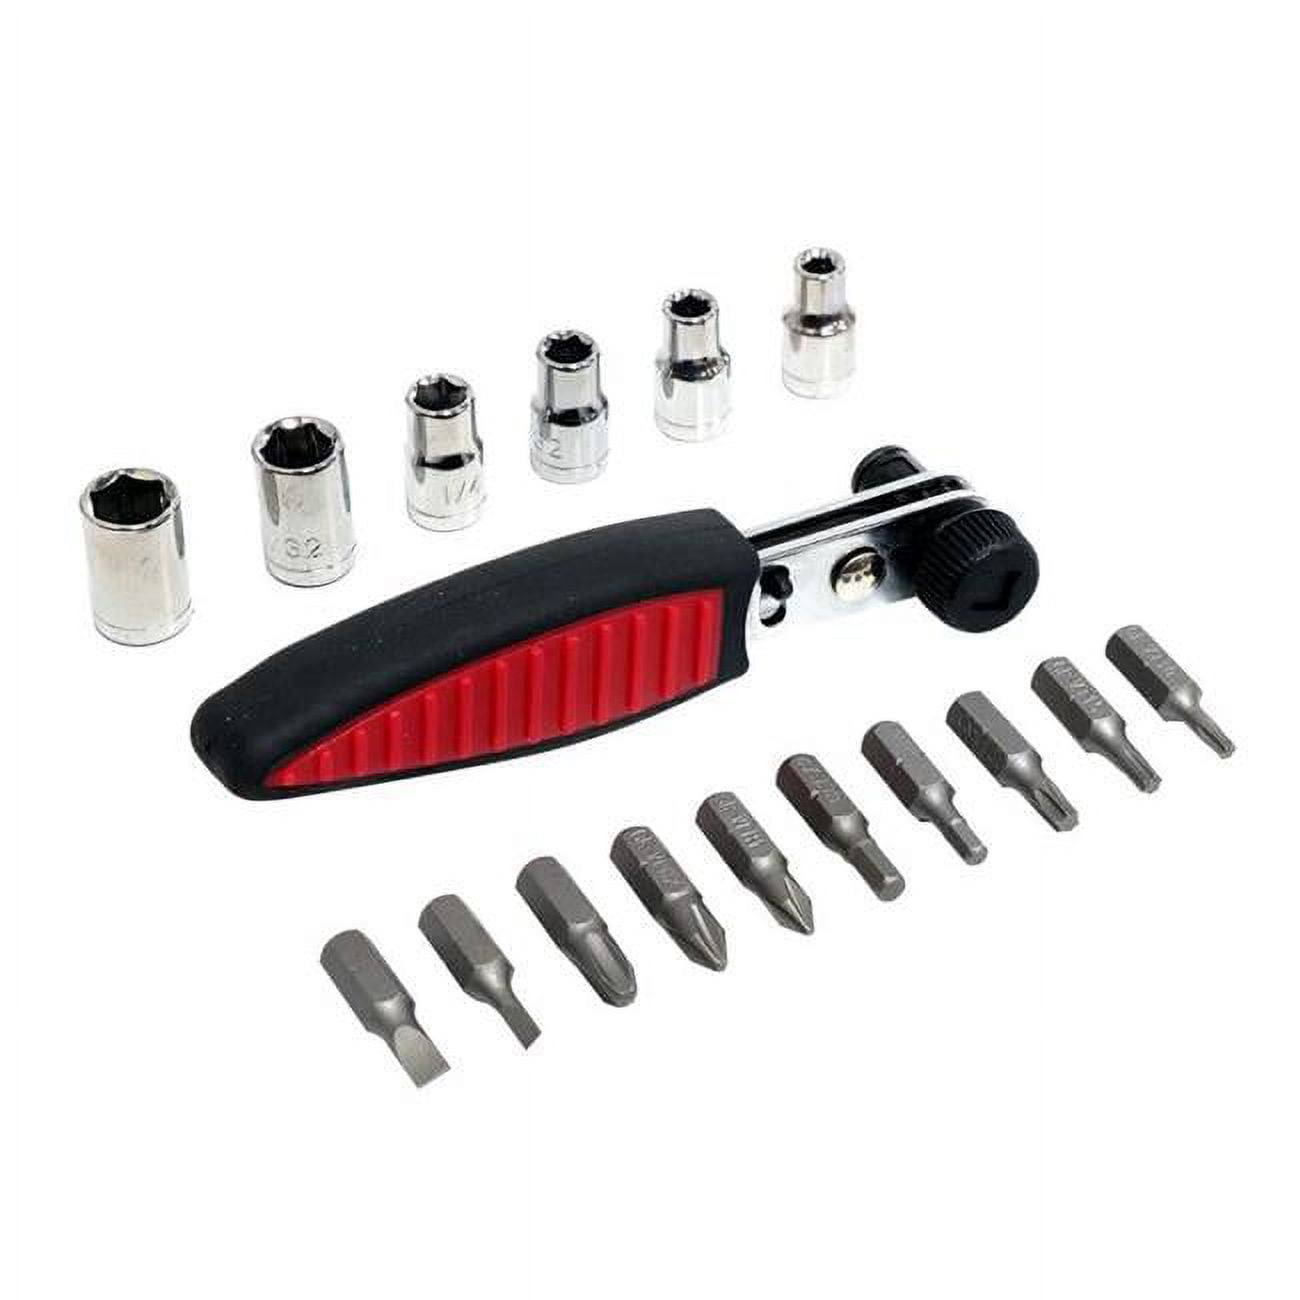 Picture of Allied 66529 Ratchet Driver Set - 17 Piece